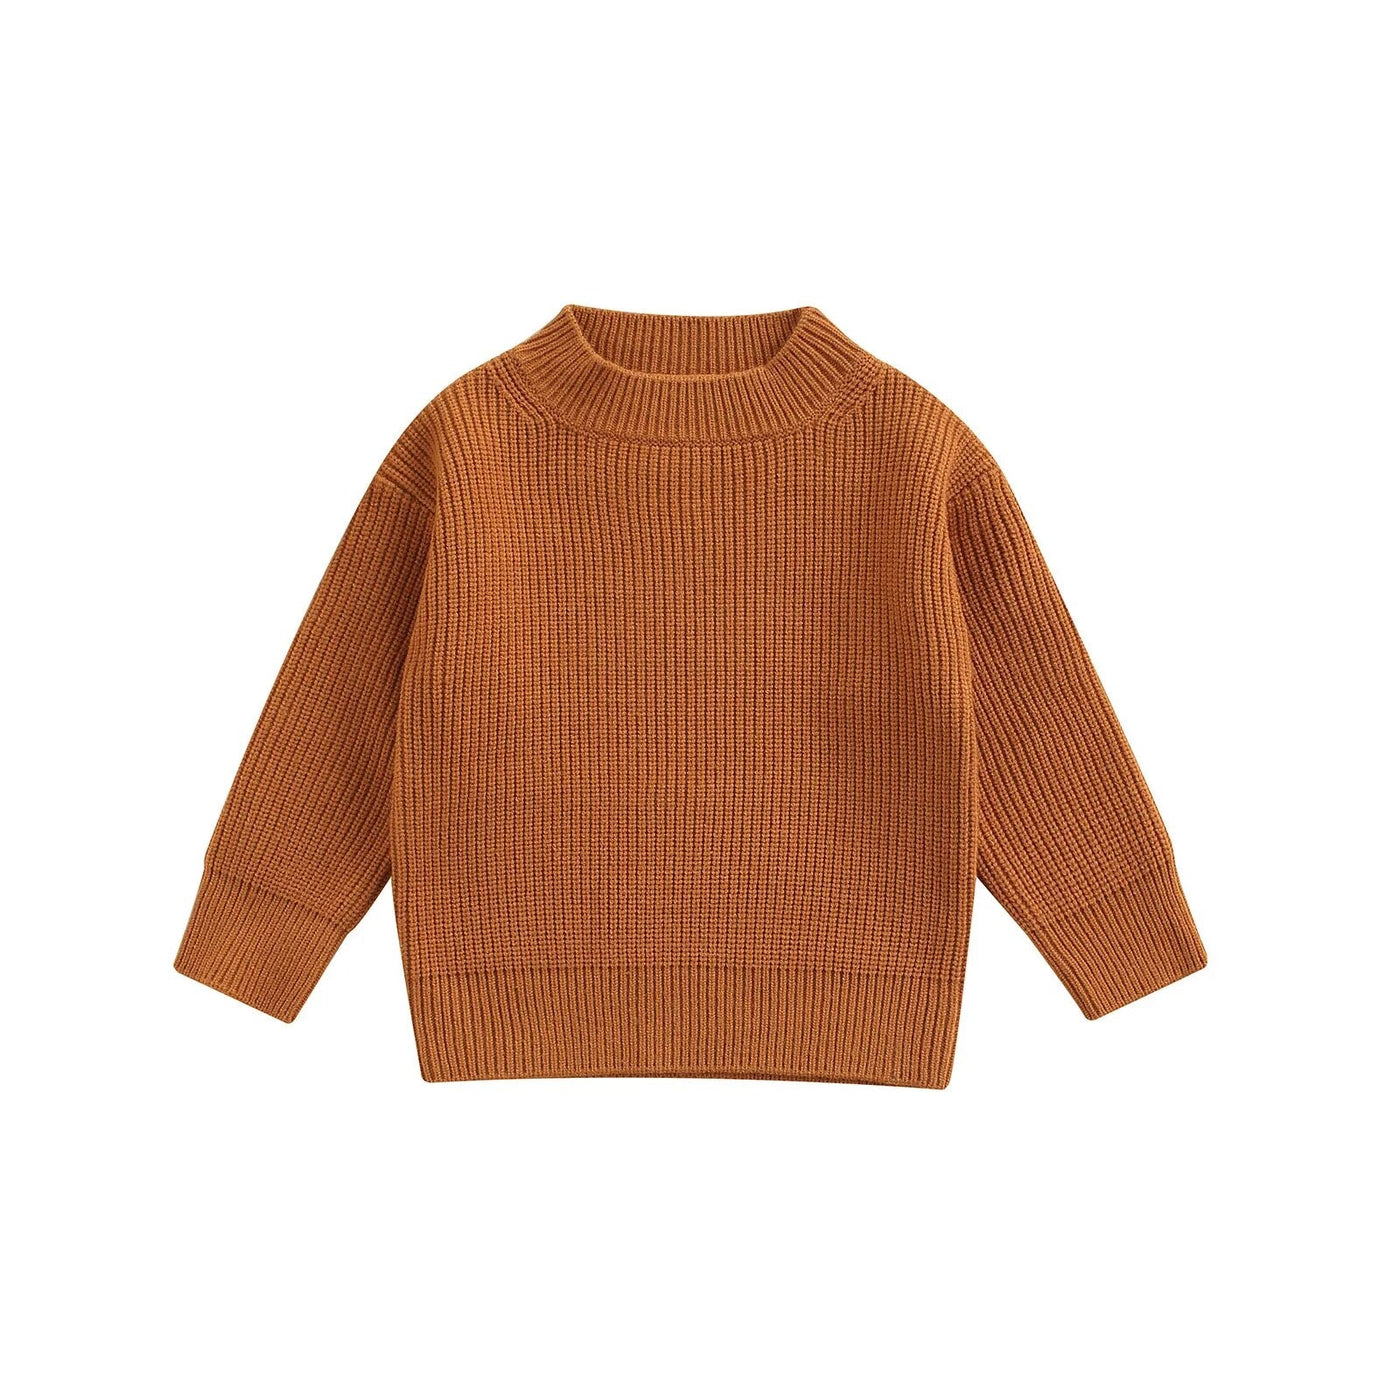 Thick Knitted Long Sleeve Sweaters Baby Kid 0-6 Years - Skaldo & Malin